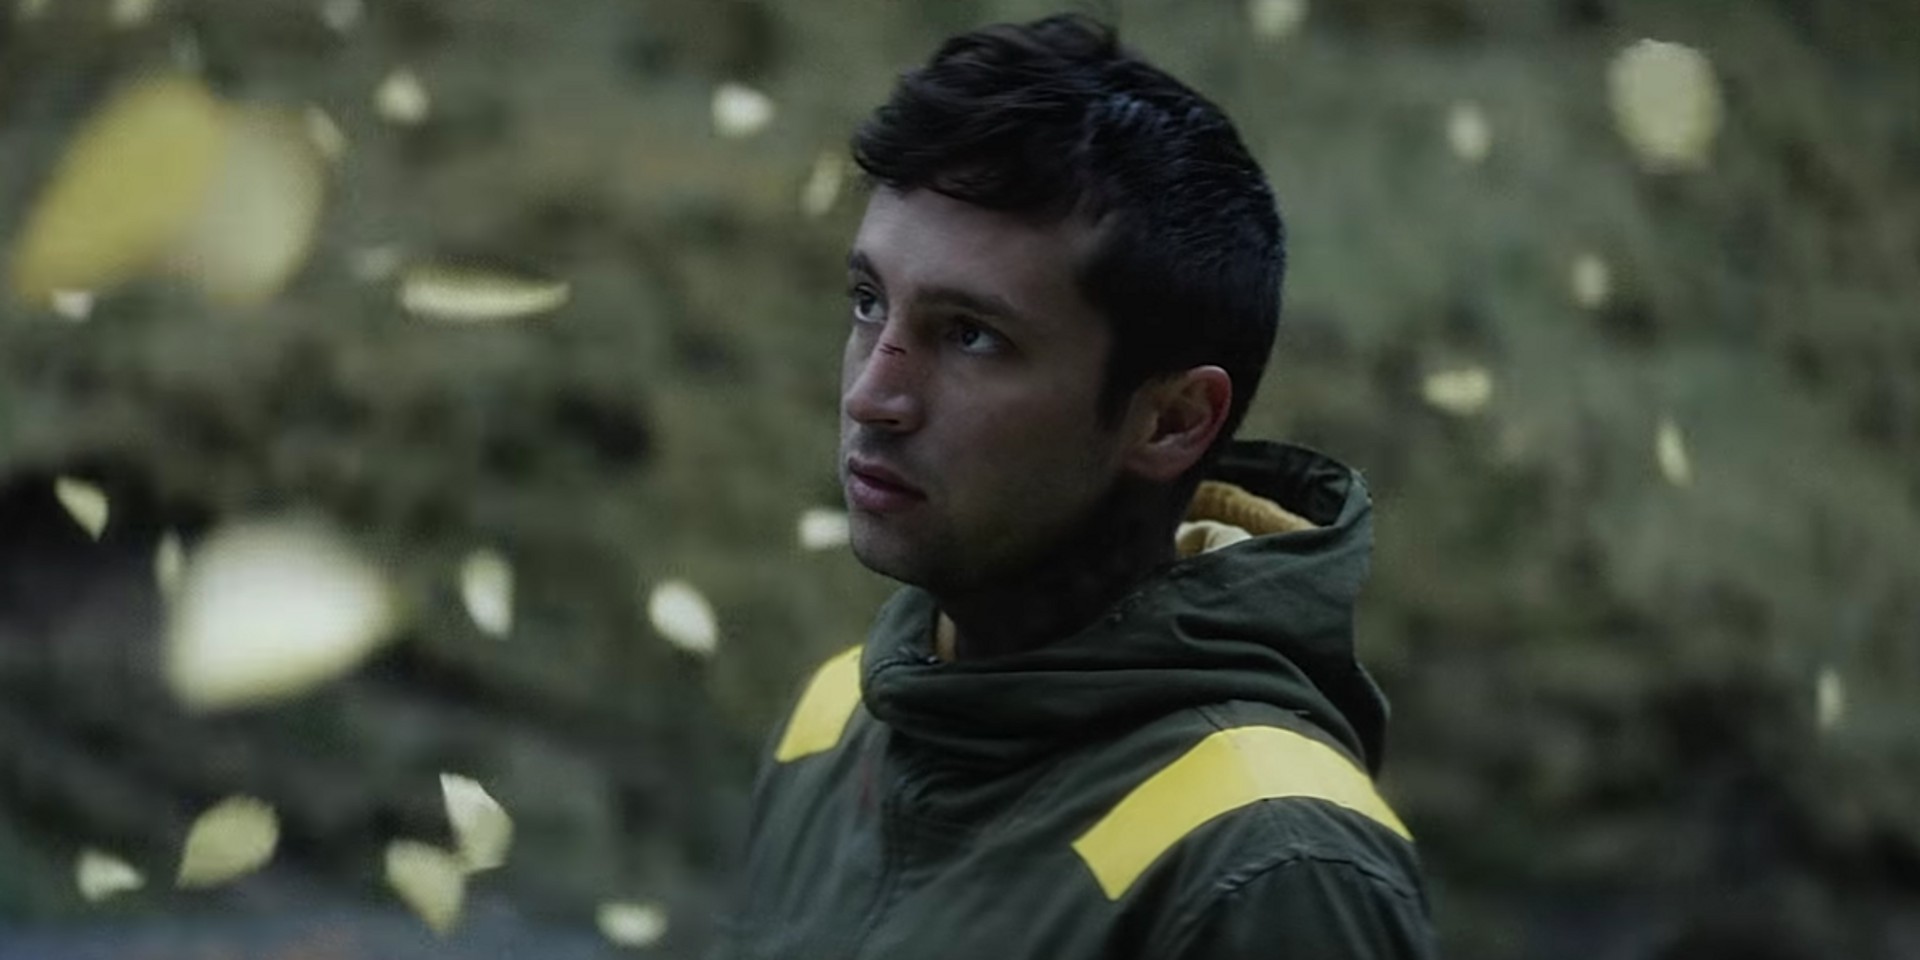 Twenty One Pilots return with two new singles, 'Jumpsuit' and 'Nico And The Niners' – watch